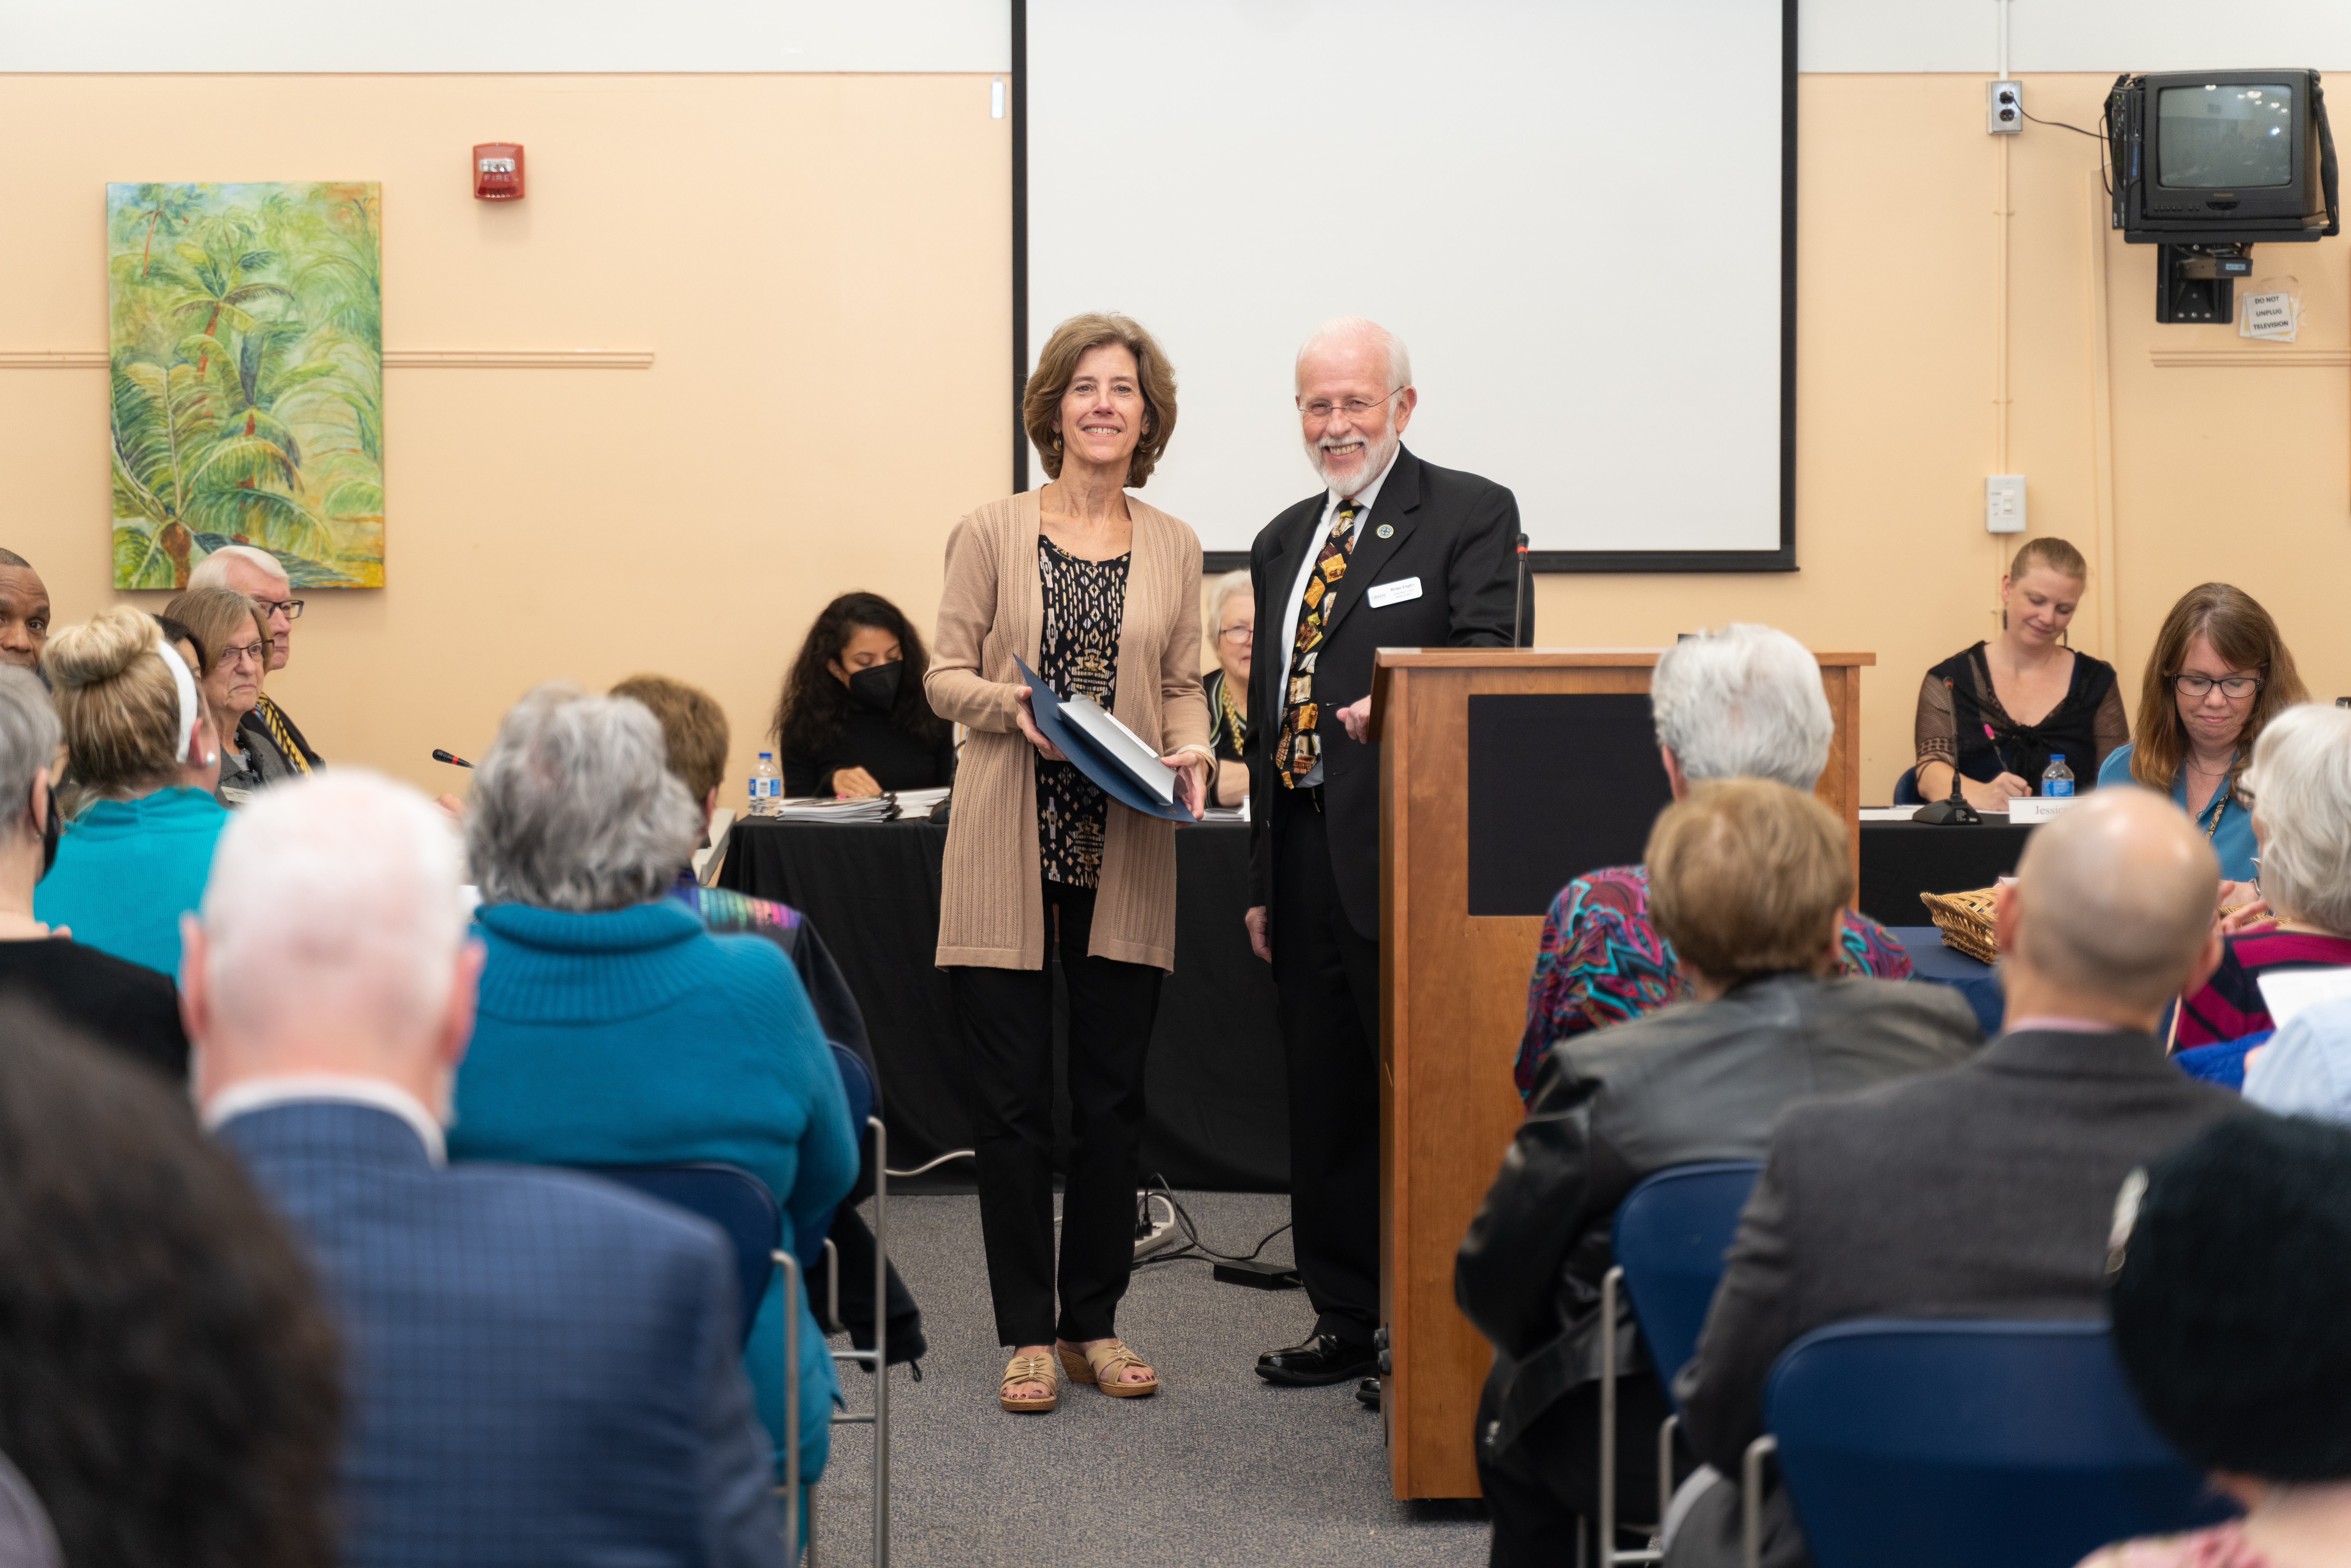 Library Board of Trustees Chair Brian Engler presents Cathy Pluchinsky of the Friends of Centreville Regional Library with an award.